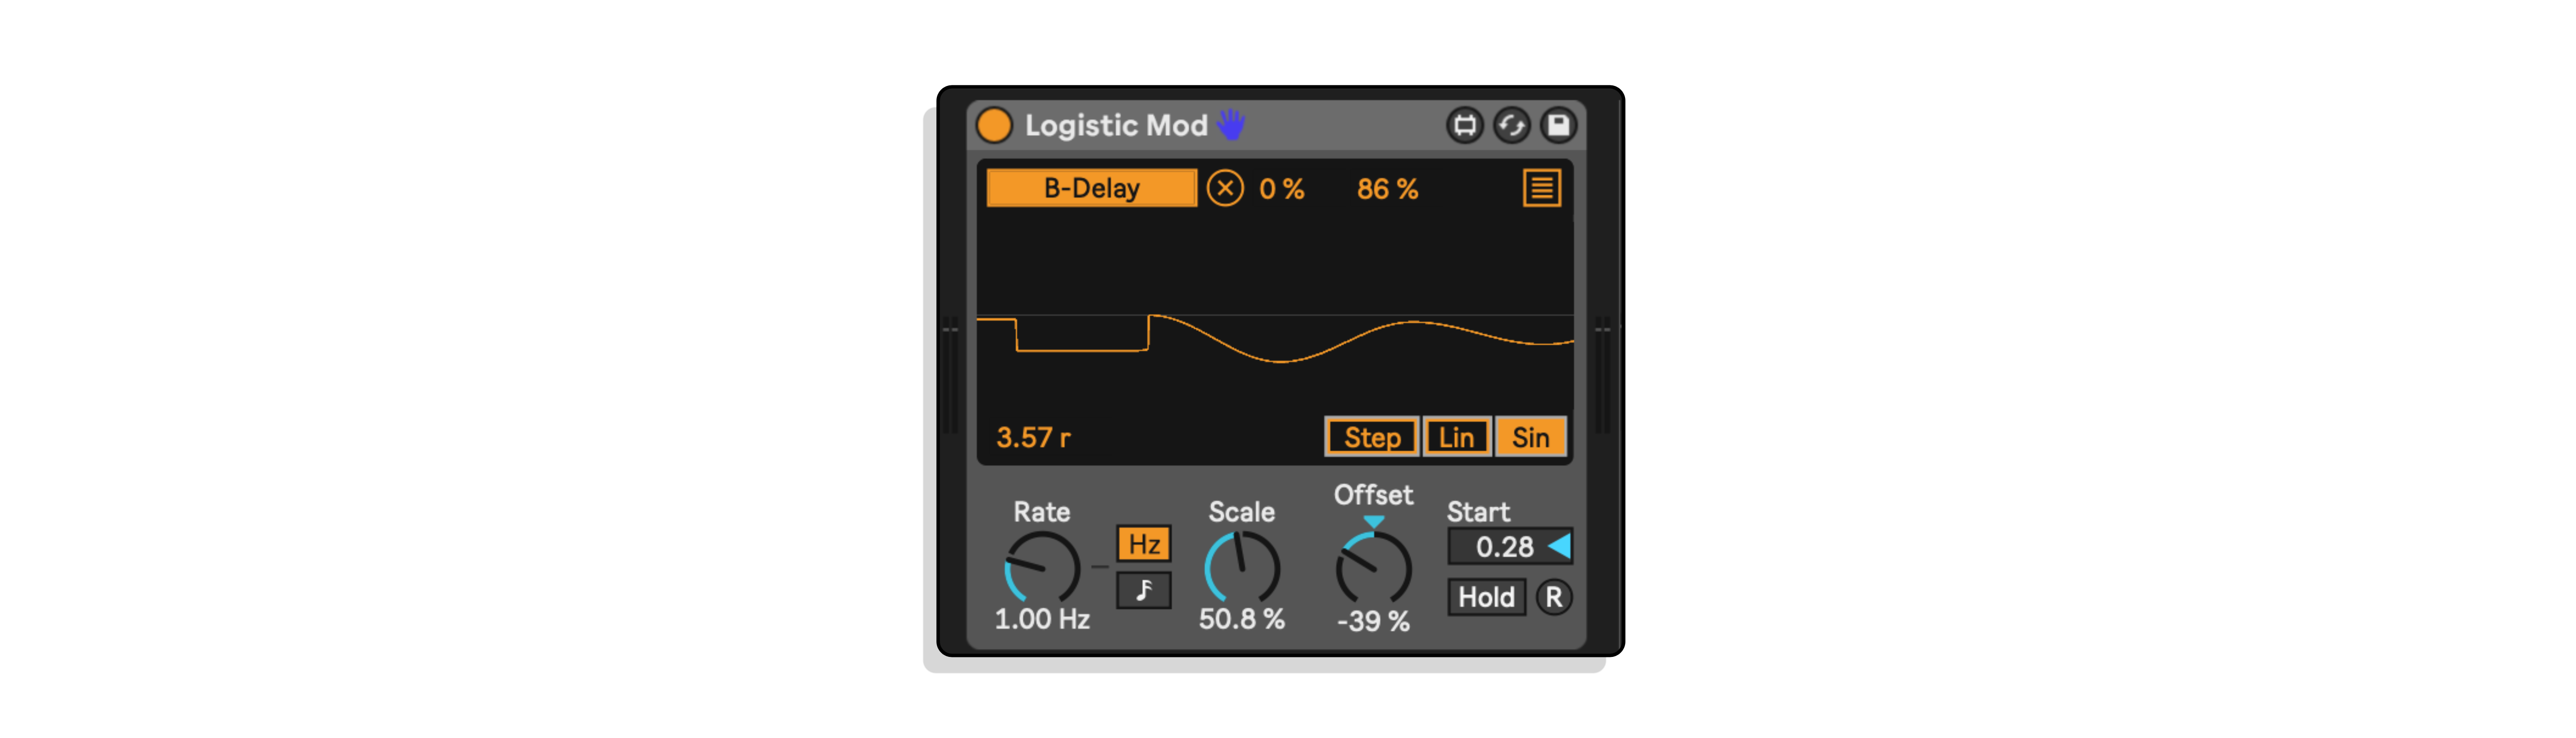 Logistic Mod MaxforLive Device for Ableton Live by Dillon Bastan